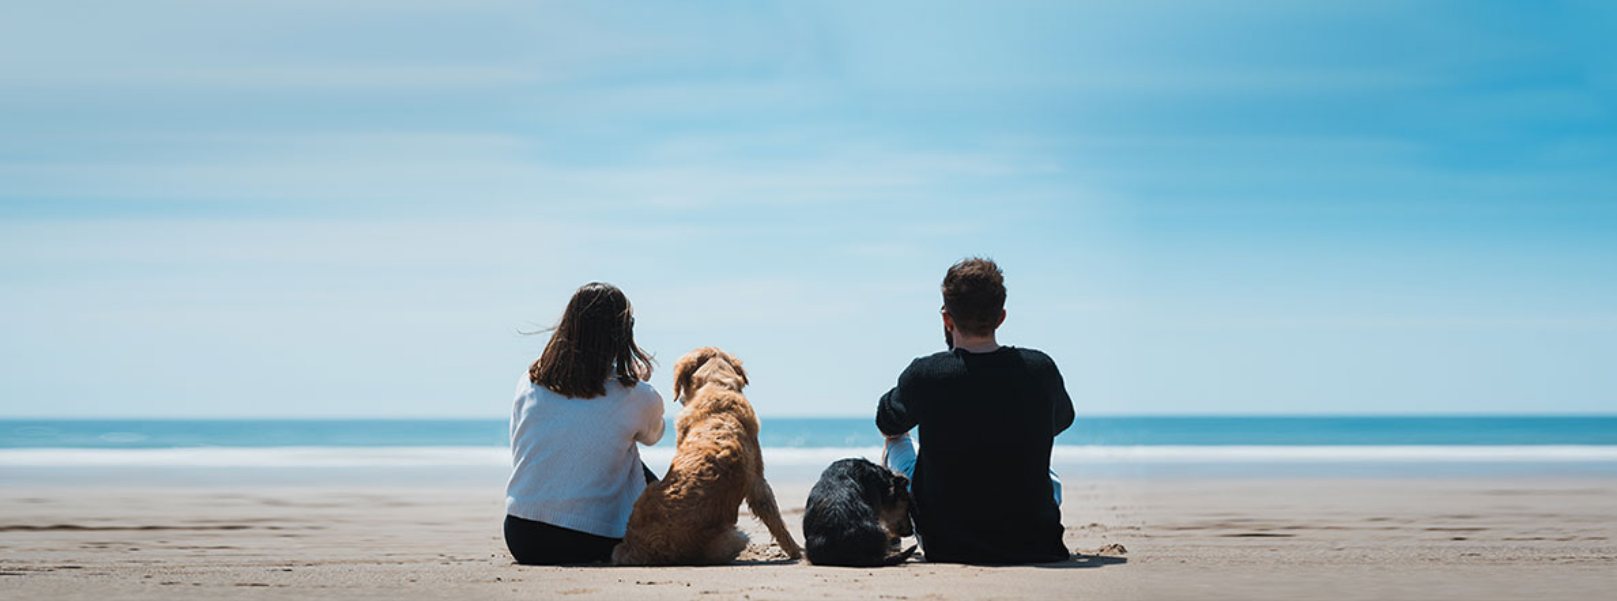 couple-and-dog-at-beach-banner